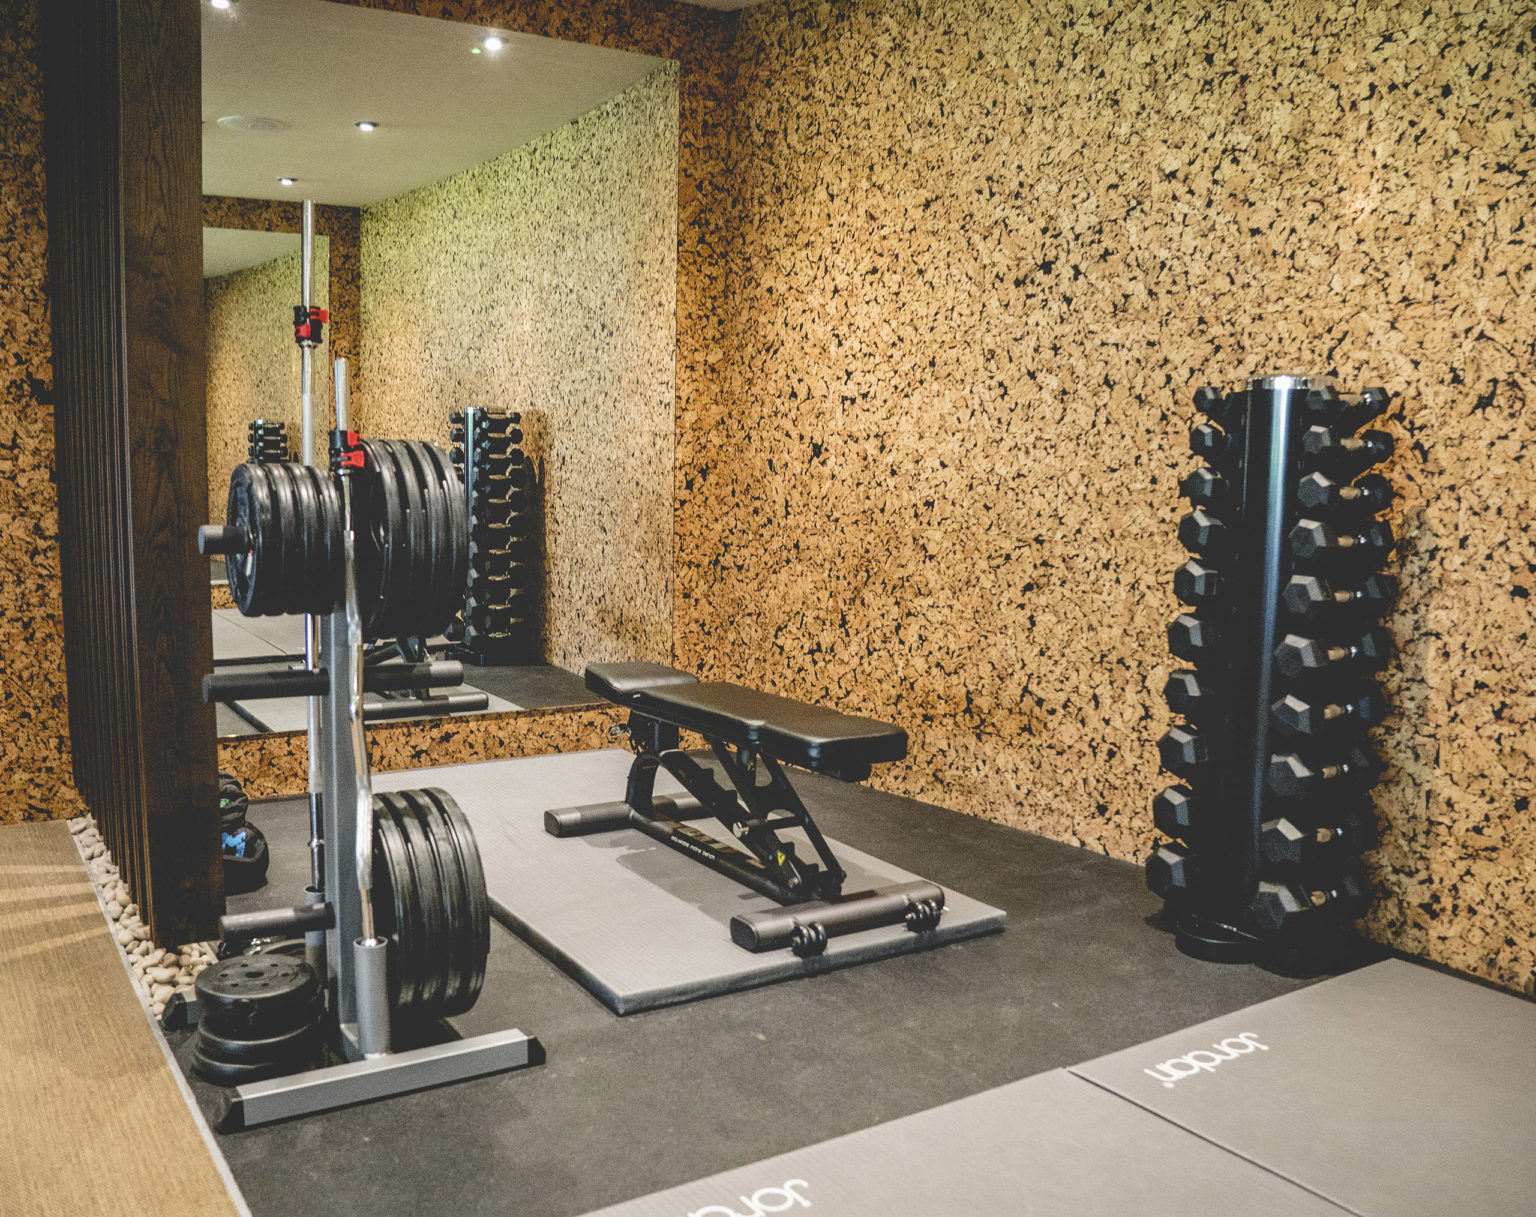 Gym equipment at Swinton Park Hotel's luxury spa near Harrogate and the Yorkshire Dales in North Yorkshire